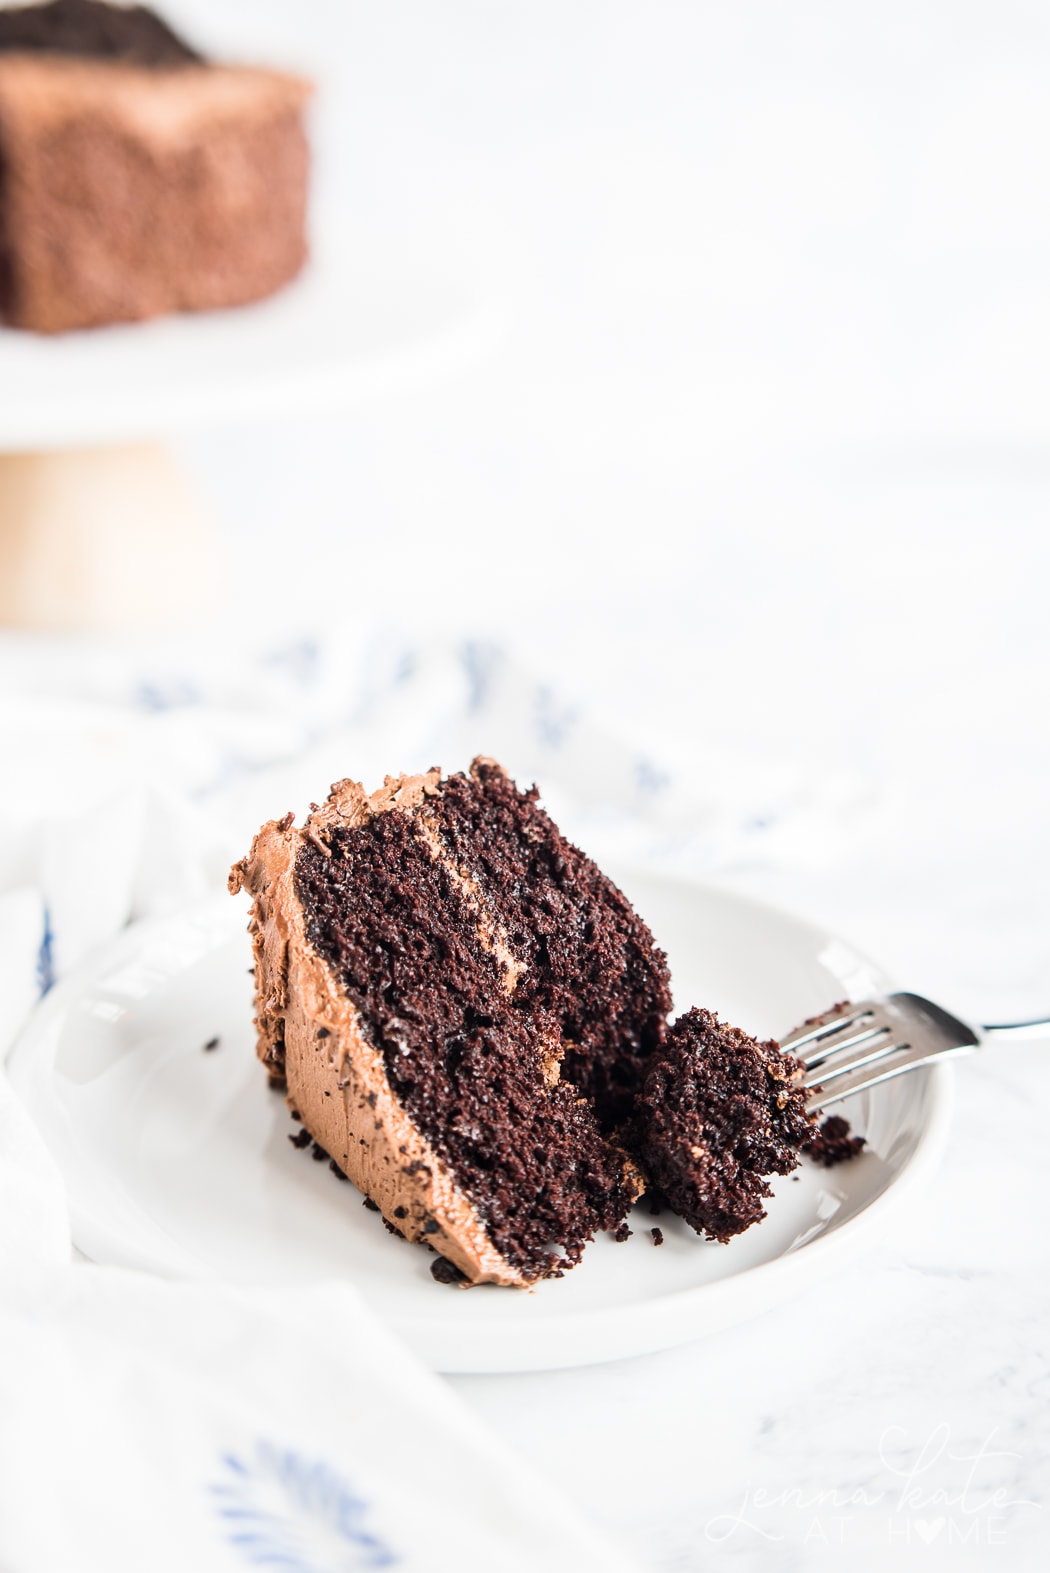 Light and fluffy chocolate cake thanks to ingredients like coffee and buttermilk